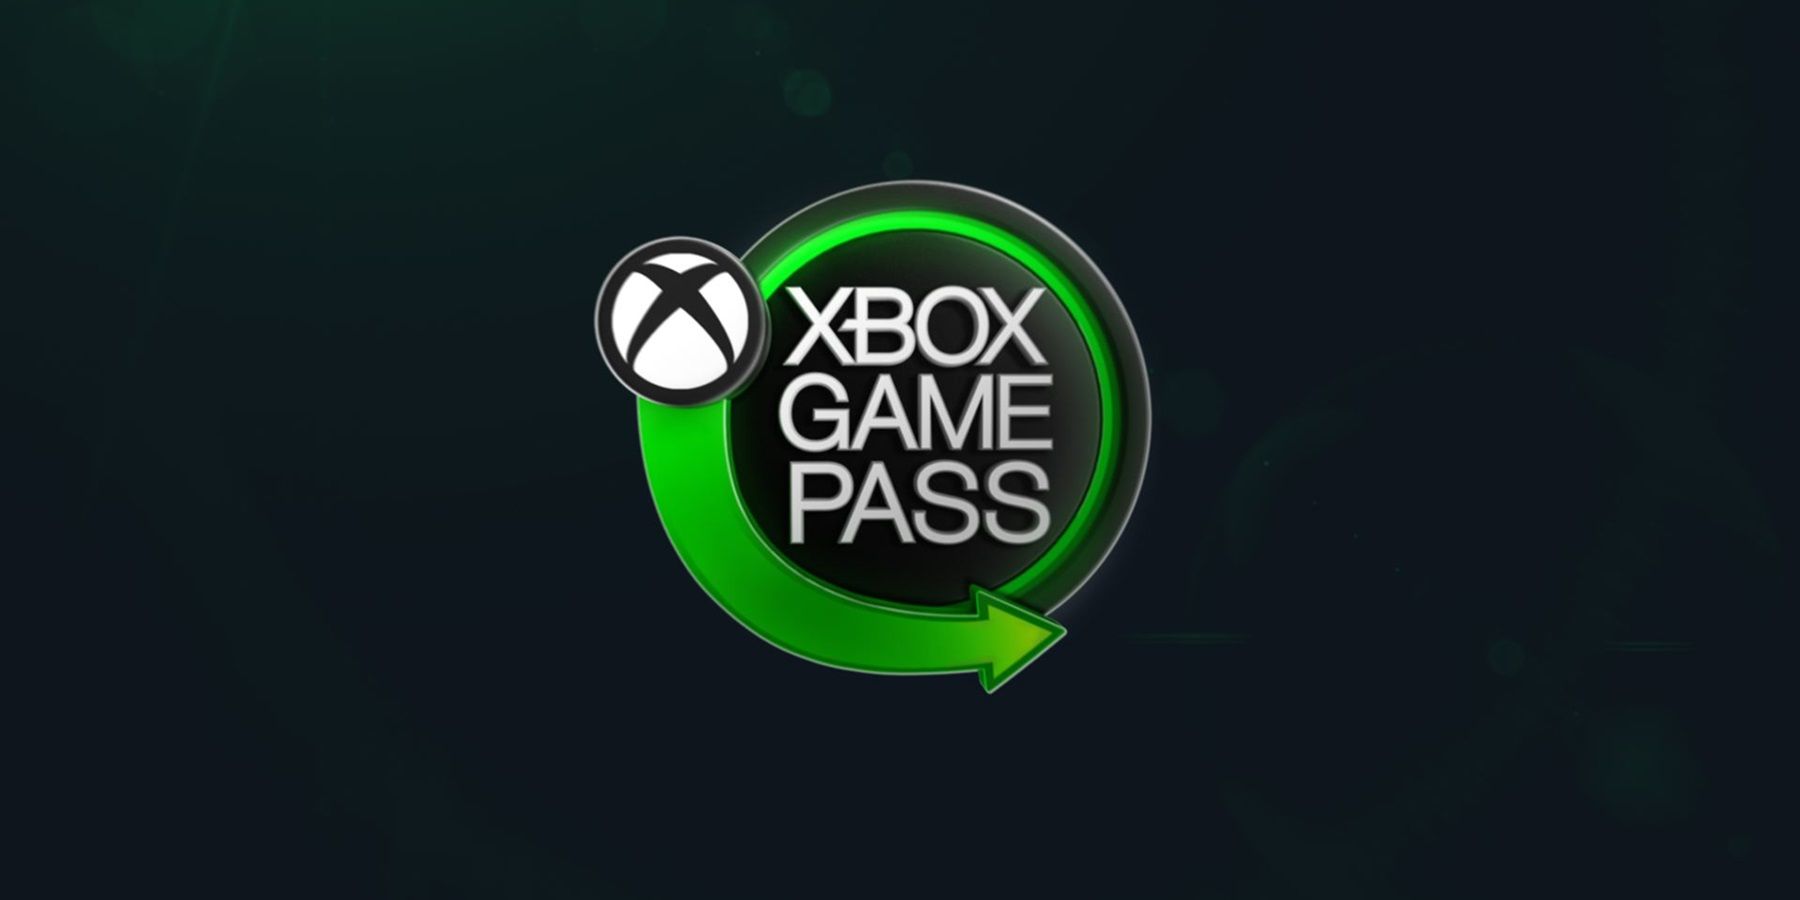 Is Wild Hearts coming to Xbox Game Pass?